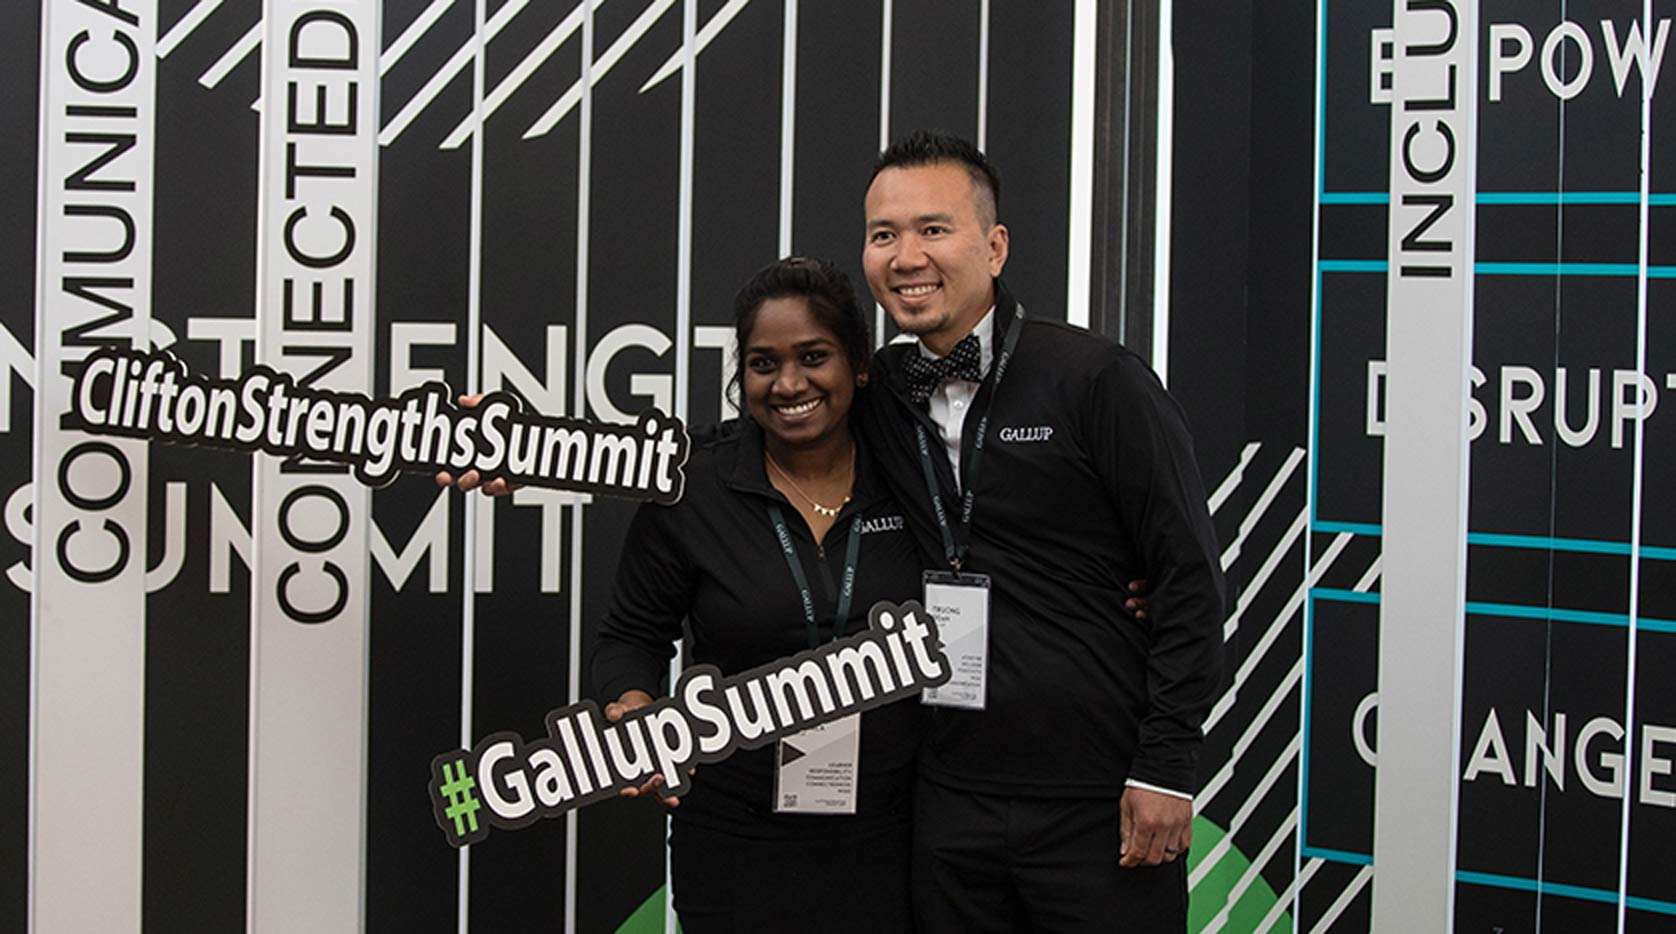 Two employees taking a picture hold a CliftonStrengthsSummit sign and a #GallupSummit sign.